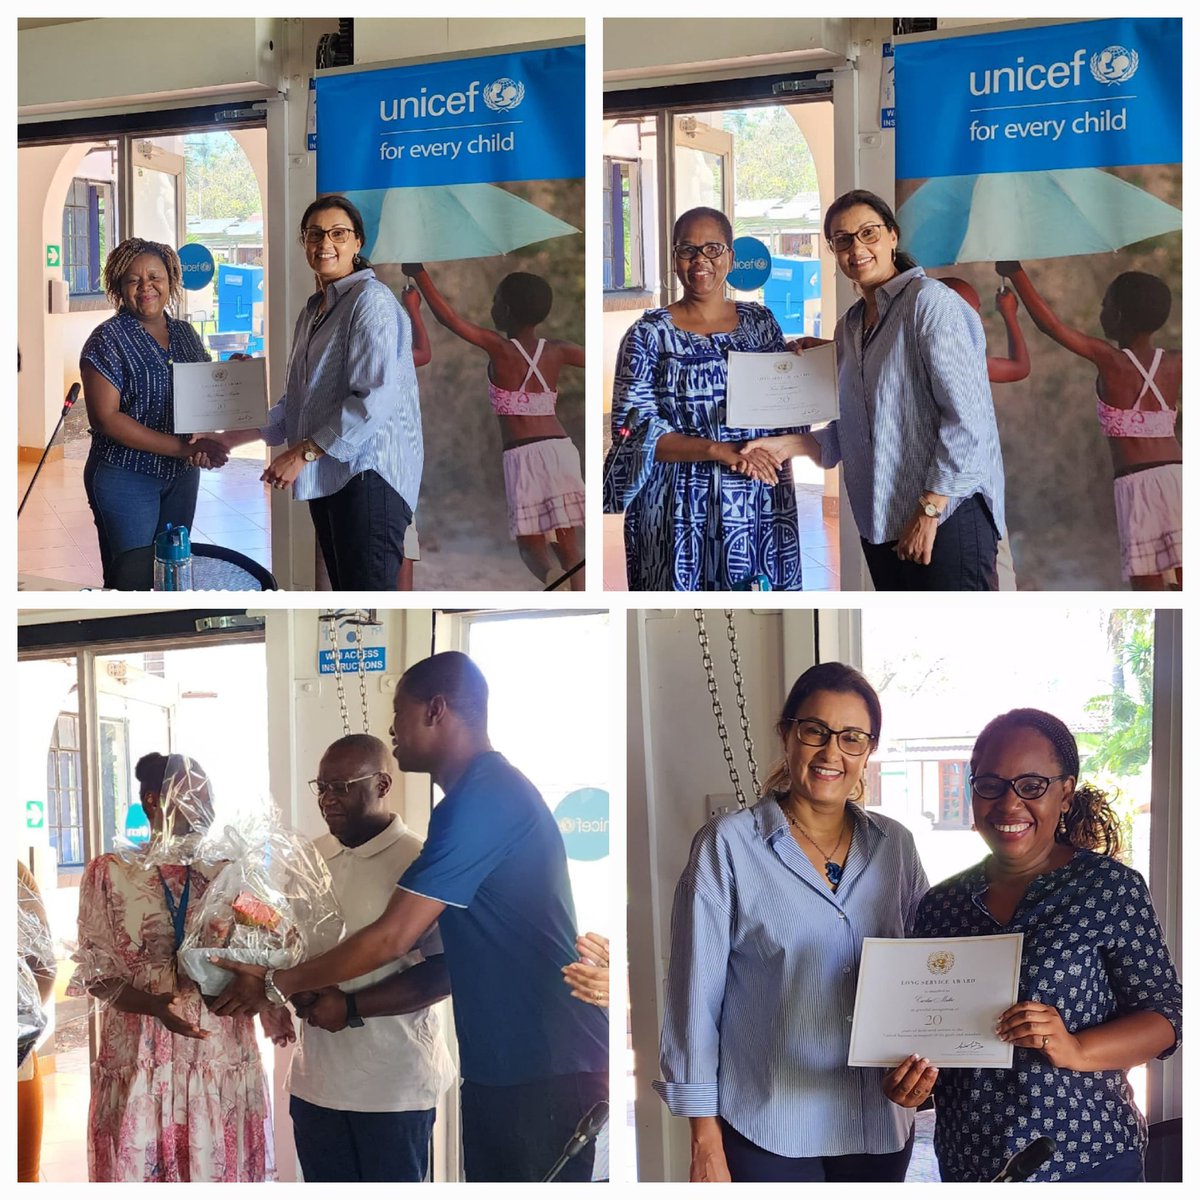 Today, I celebrate my colleagues who have devoted btw 10 & 30 yrs to the wellbeing of #children. 

Congratulations to Moreblessing Muyanka, Kenae Ramodimoosa, Josephine Moetsabi & Caroline Madho for the #LongServiceAward of more than 15yrs.

@StaffUnicef 
@UNICEFZIMBABWE